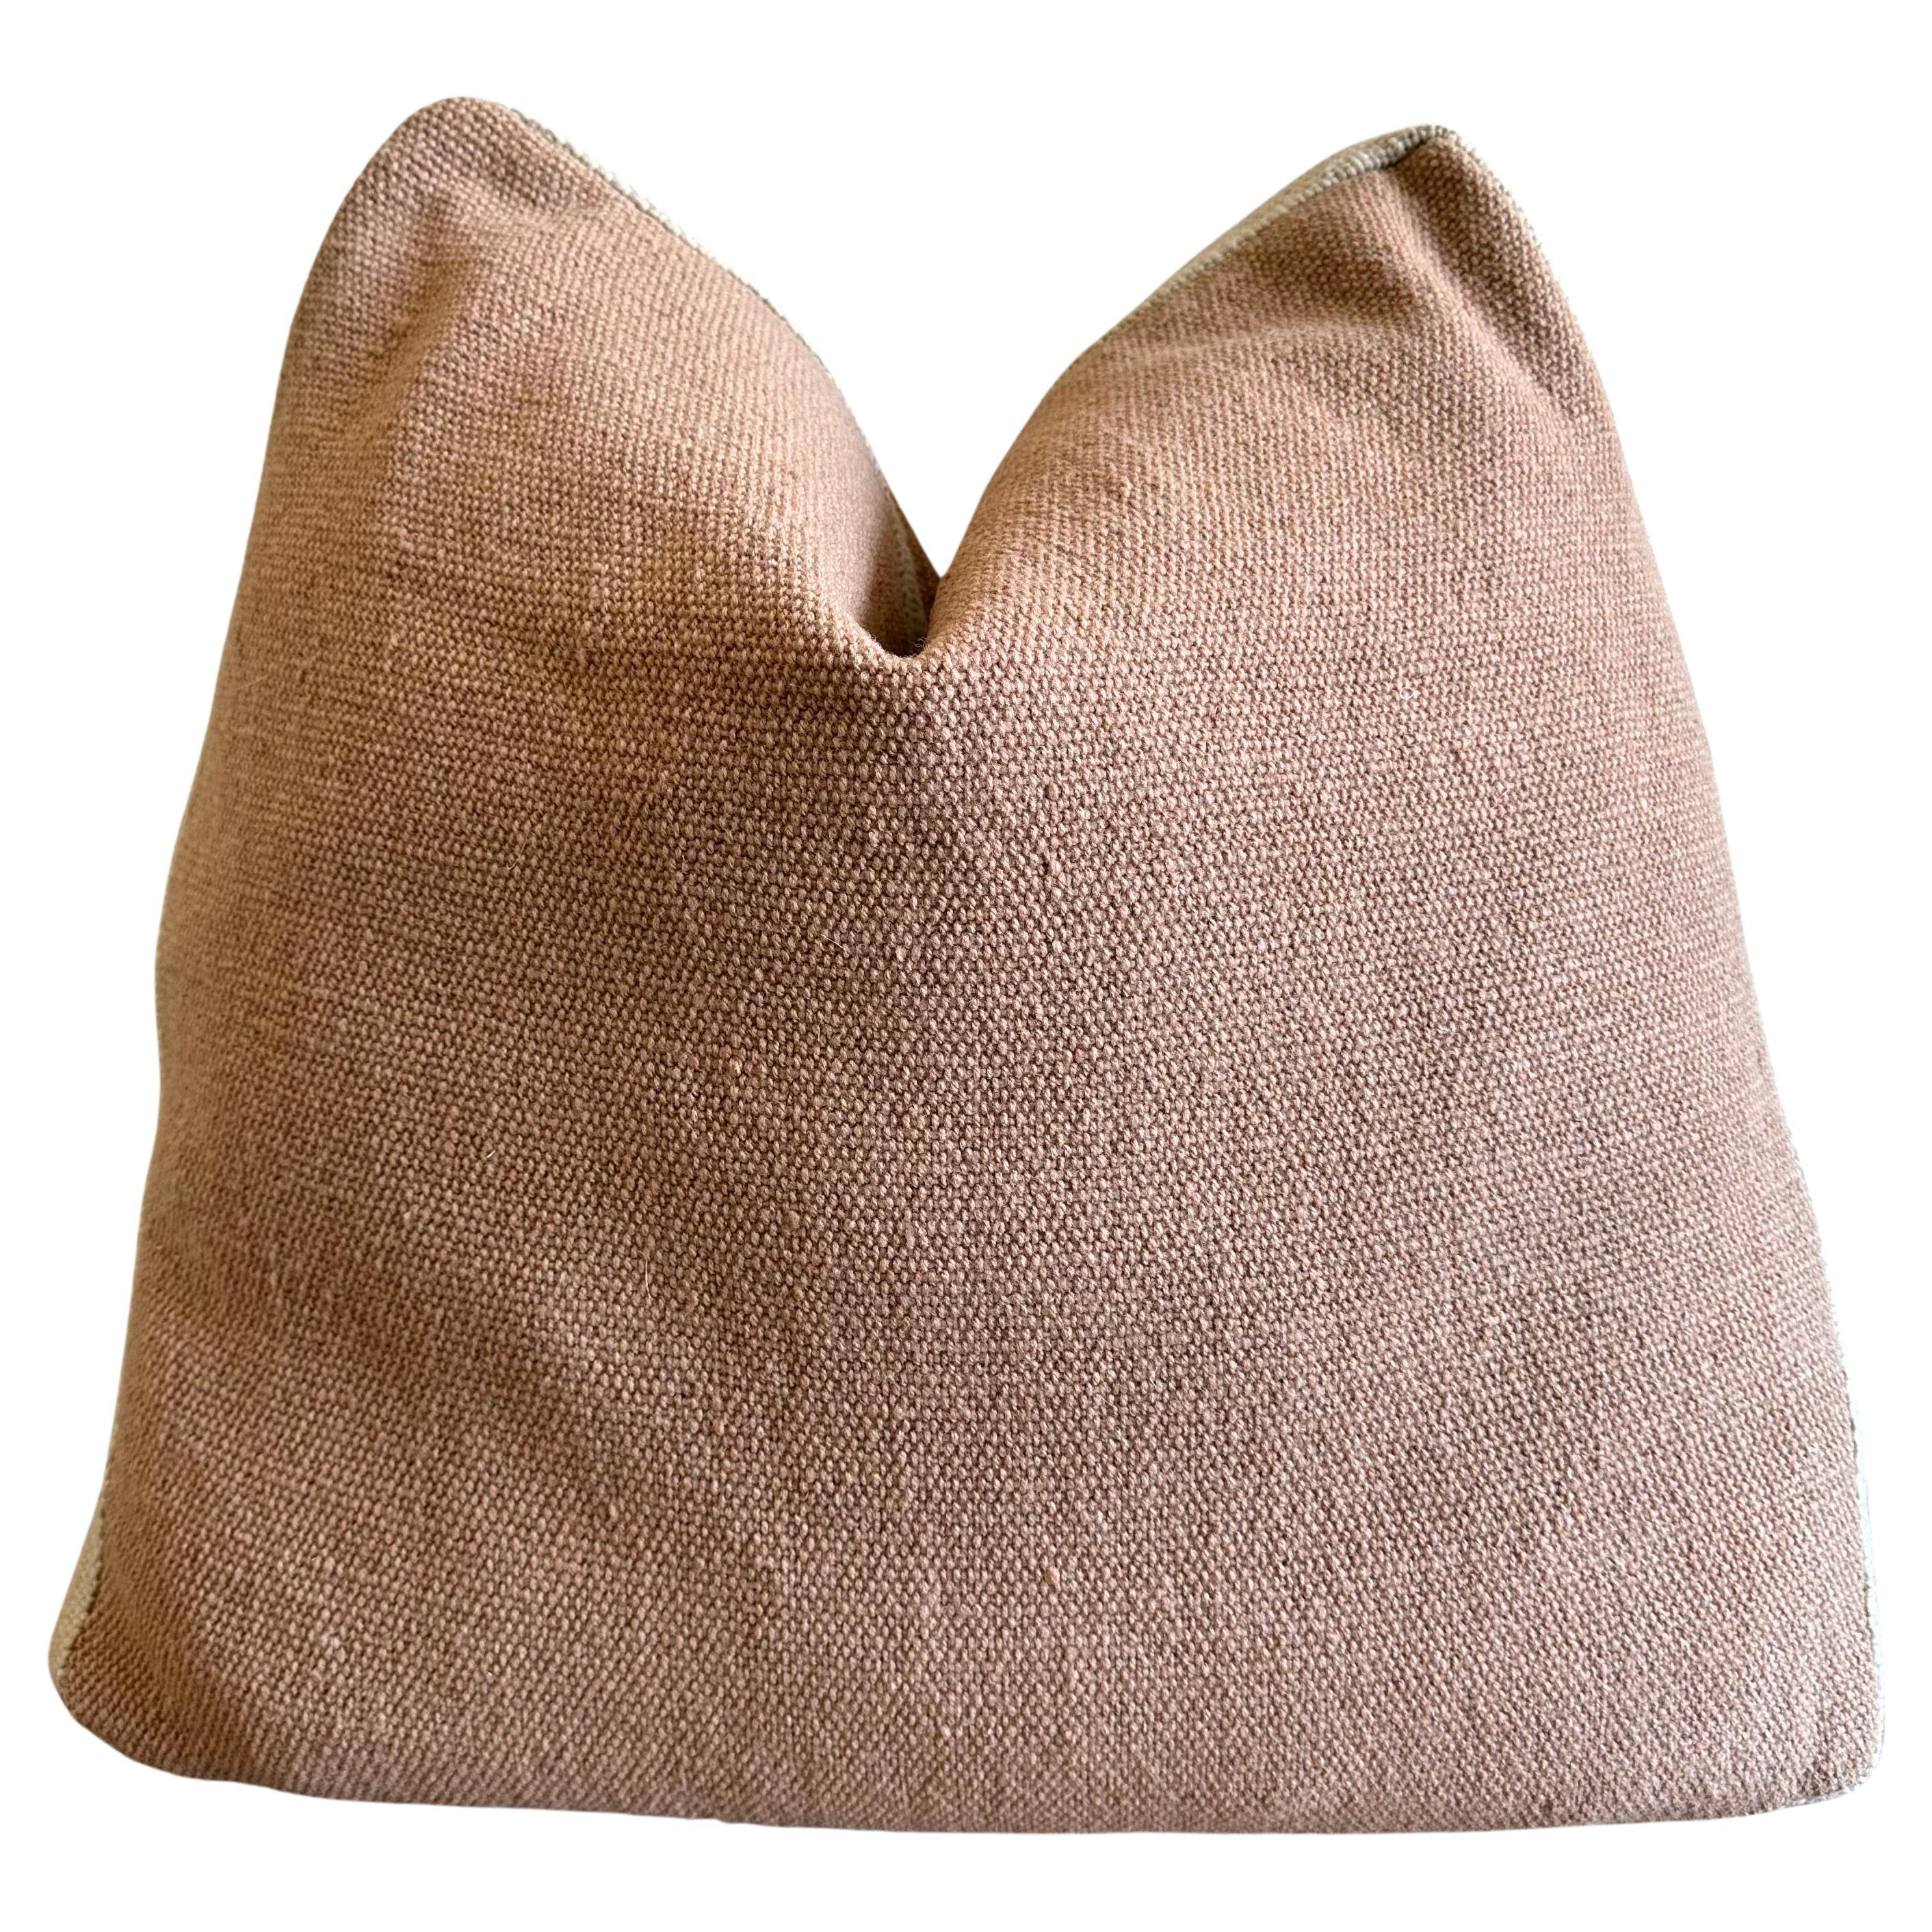 Custom Thick Woven Wool Box Pillow in Blush Nude and Oatmeal For Sale